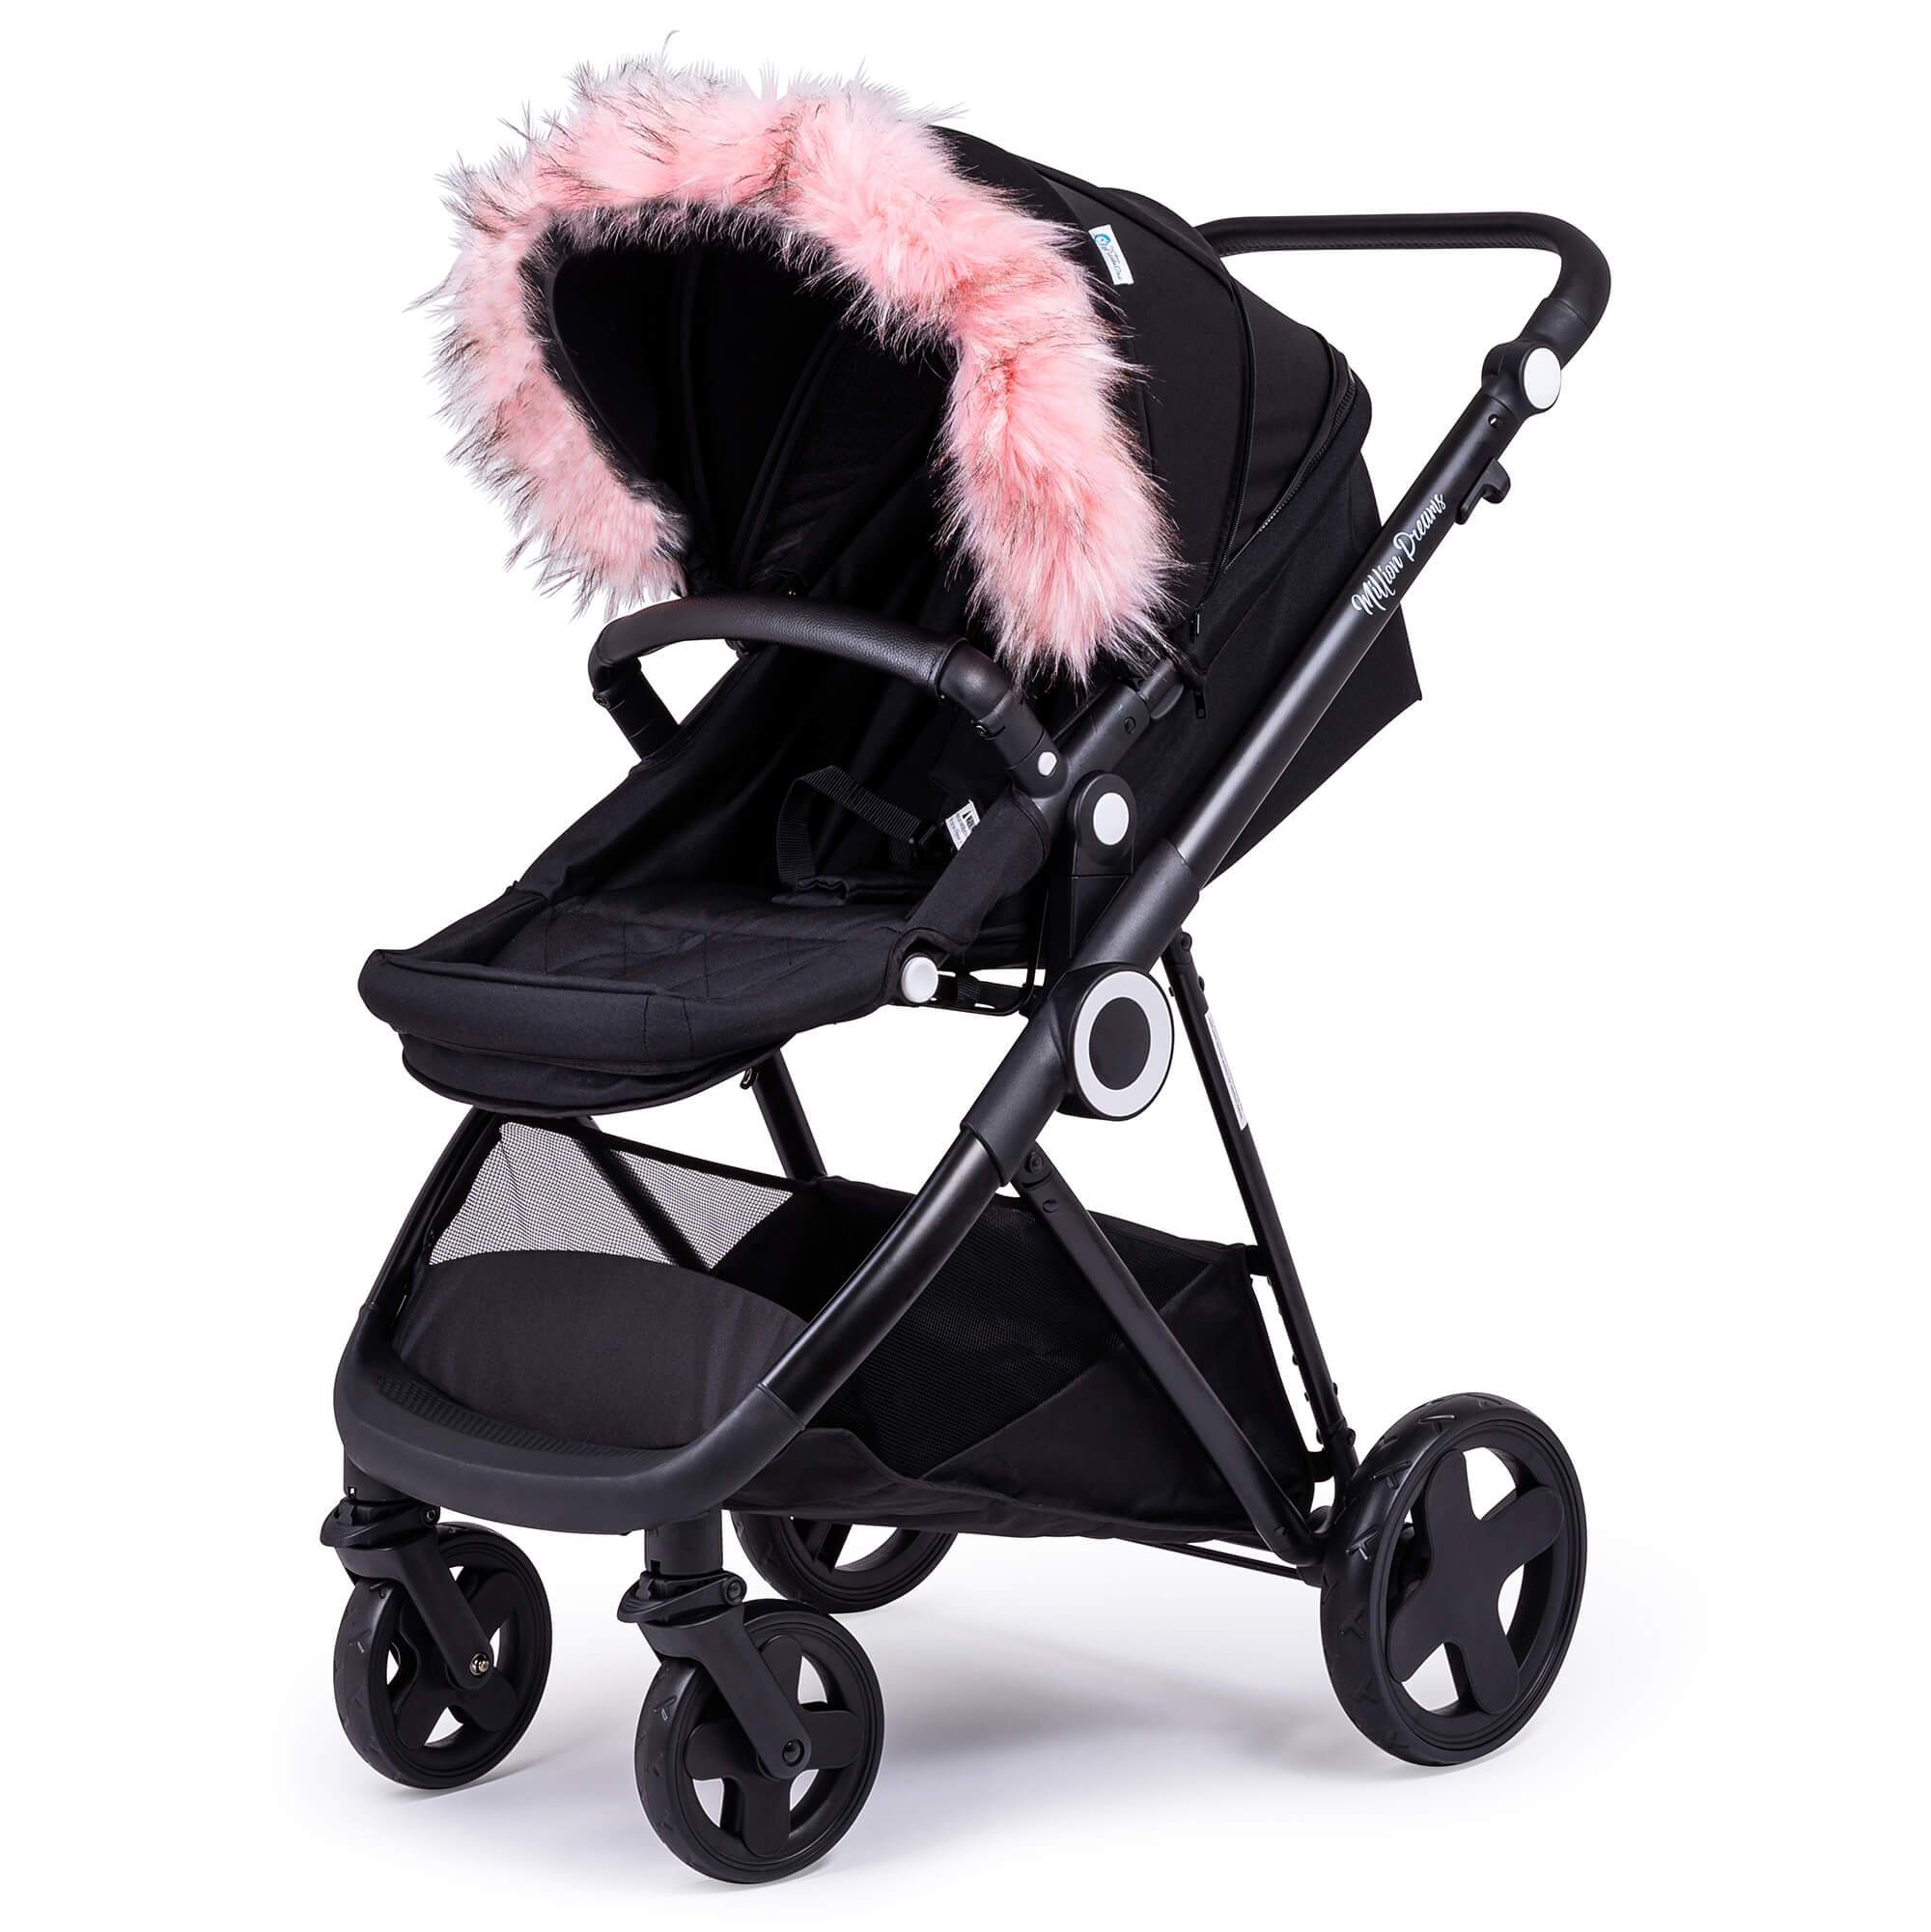 Pram Fur Hood Trim Attachment for Pushchair Compatible with Petite - Light Pink / Fits All Models | For Your Little One